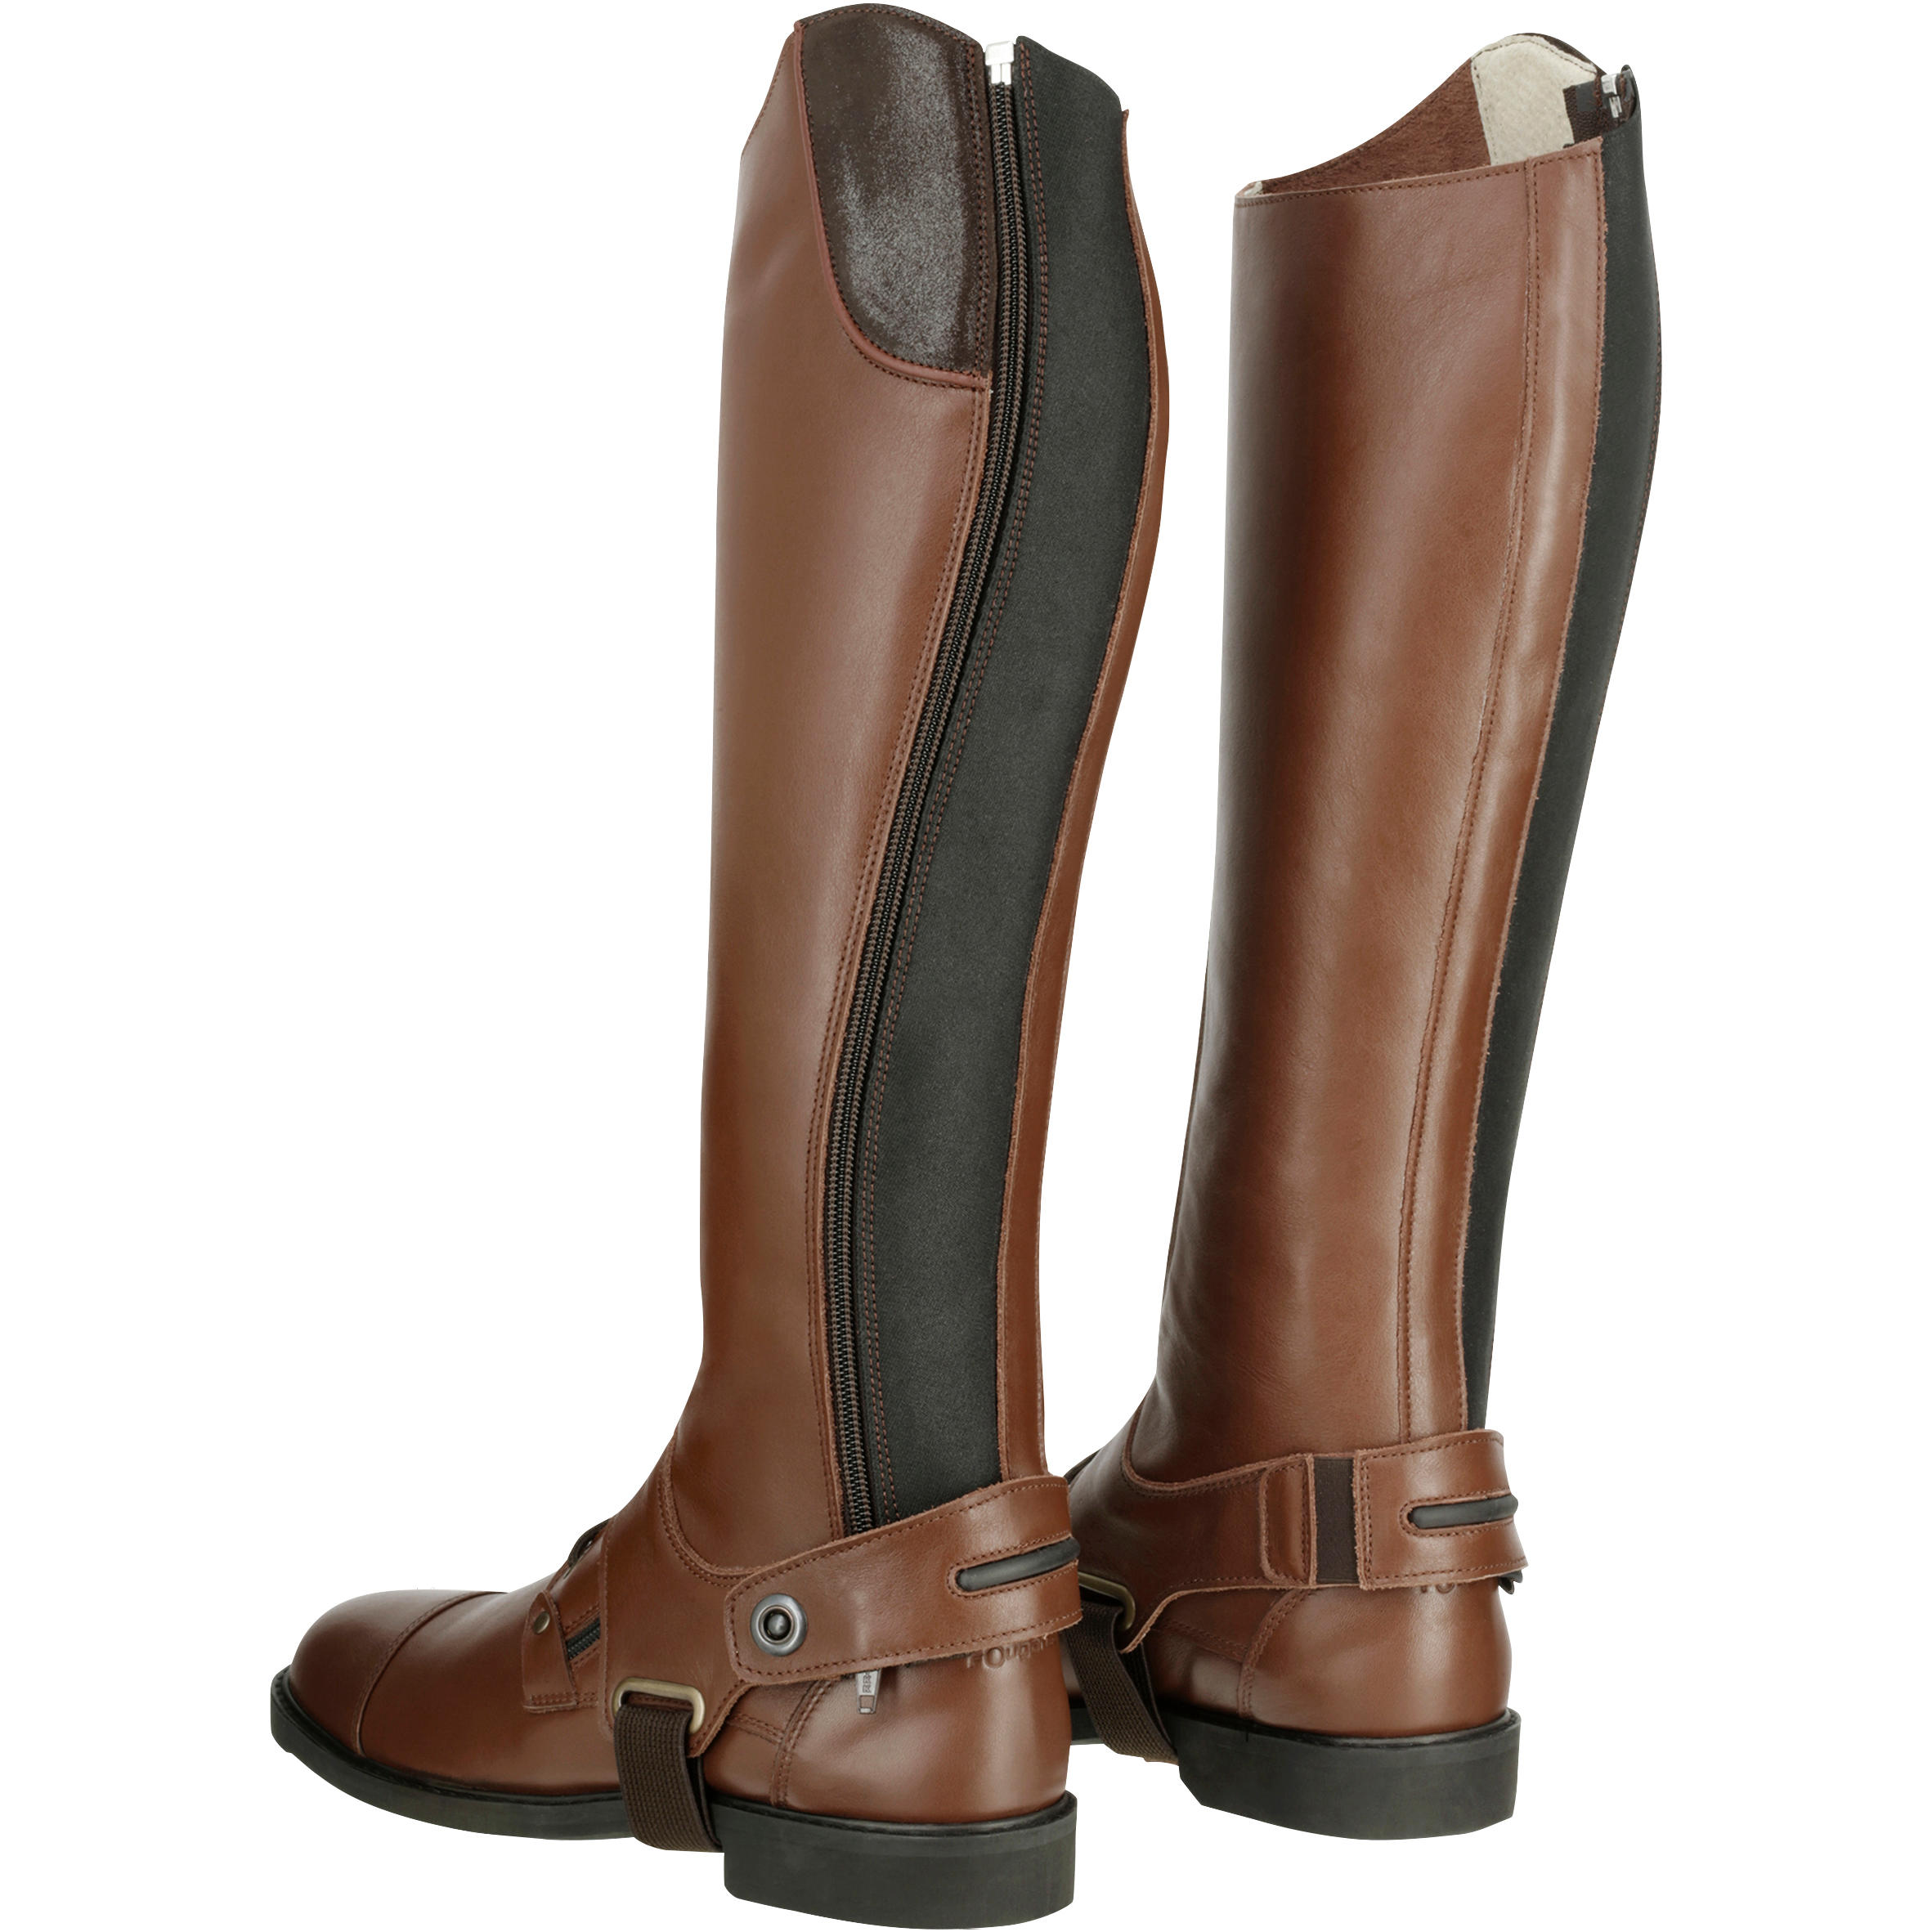 Training 700 Adult Leather Horse Riding Half Chaps - Brown 4/11